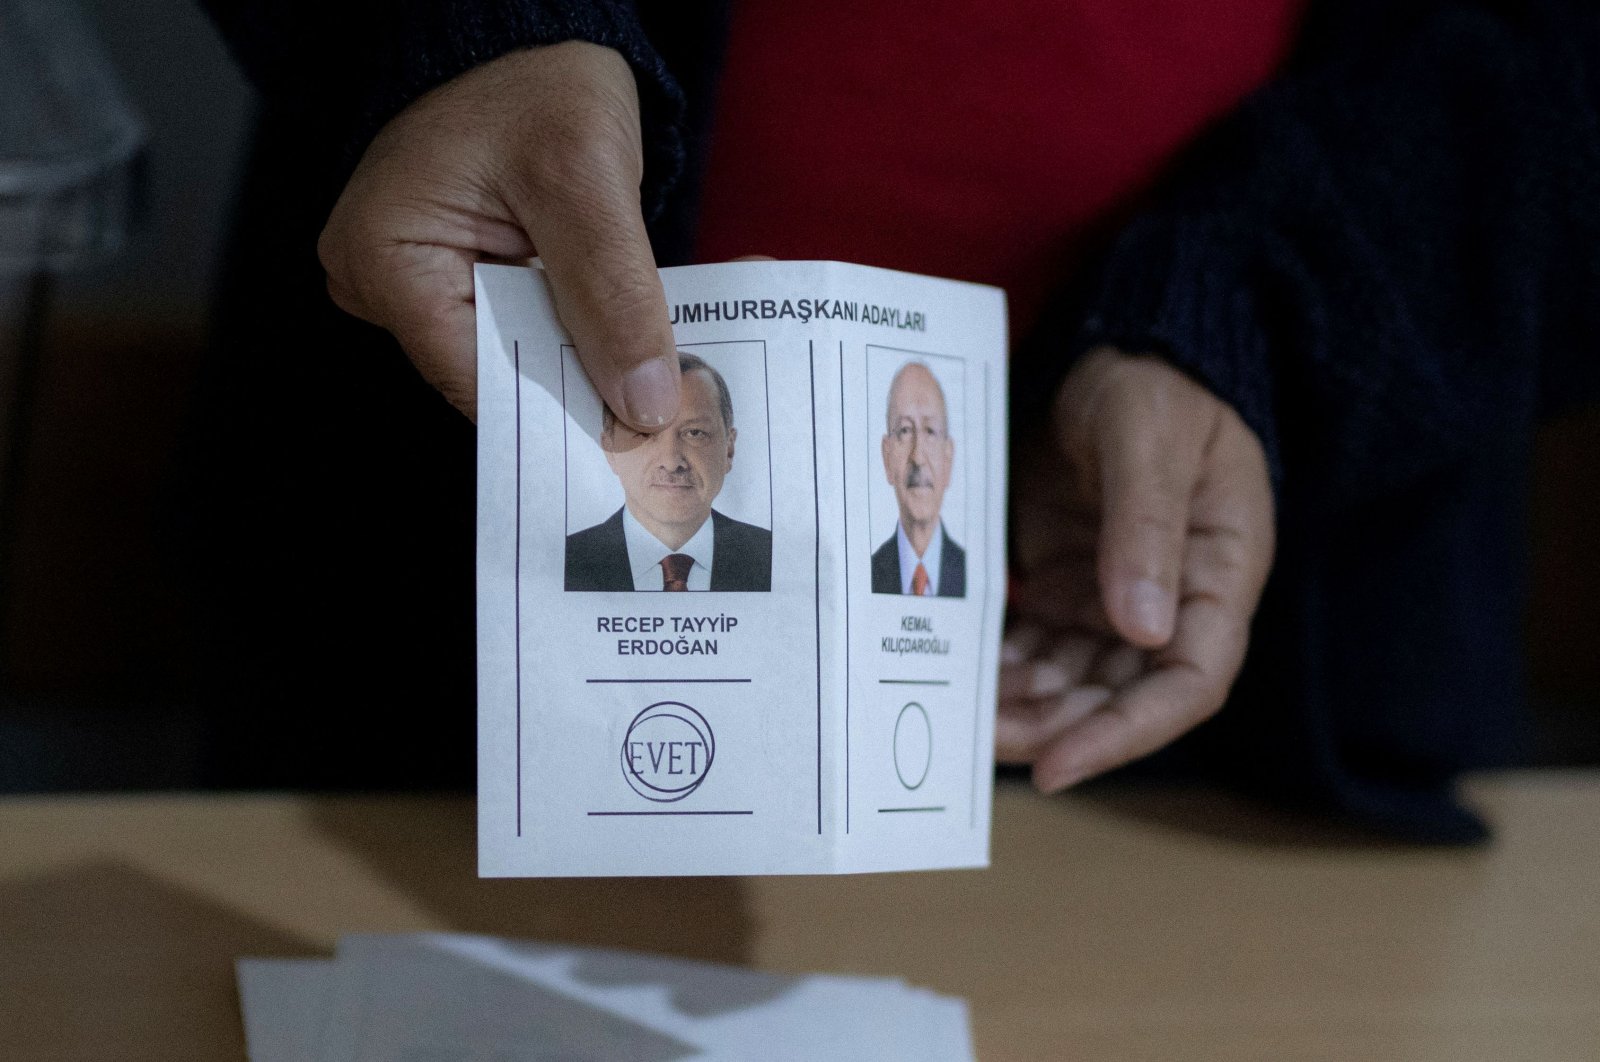 An electoral official shows a ballot during counting on the day of the second round of the presidential election in the earthquake-hit city of Kahramanmaraş, southern Türkiye, May 28, 2023. (AFP Photo)